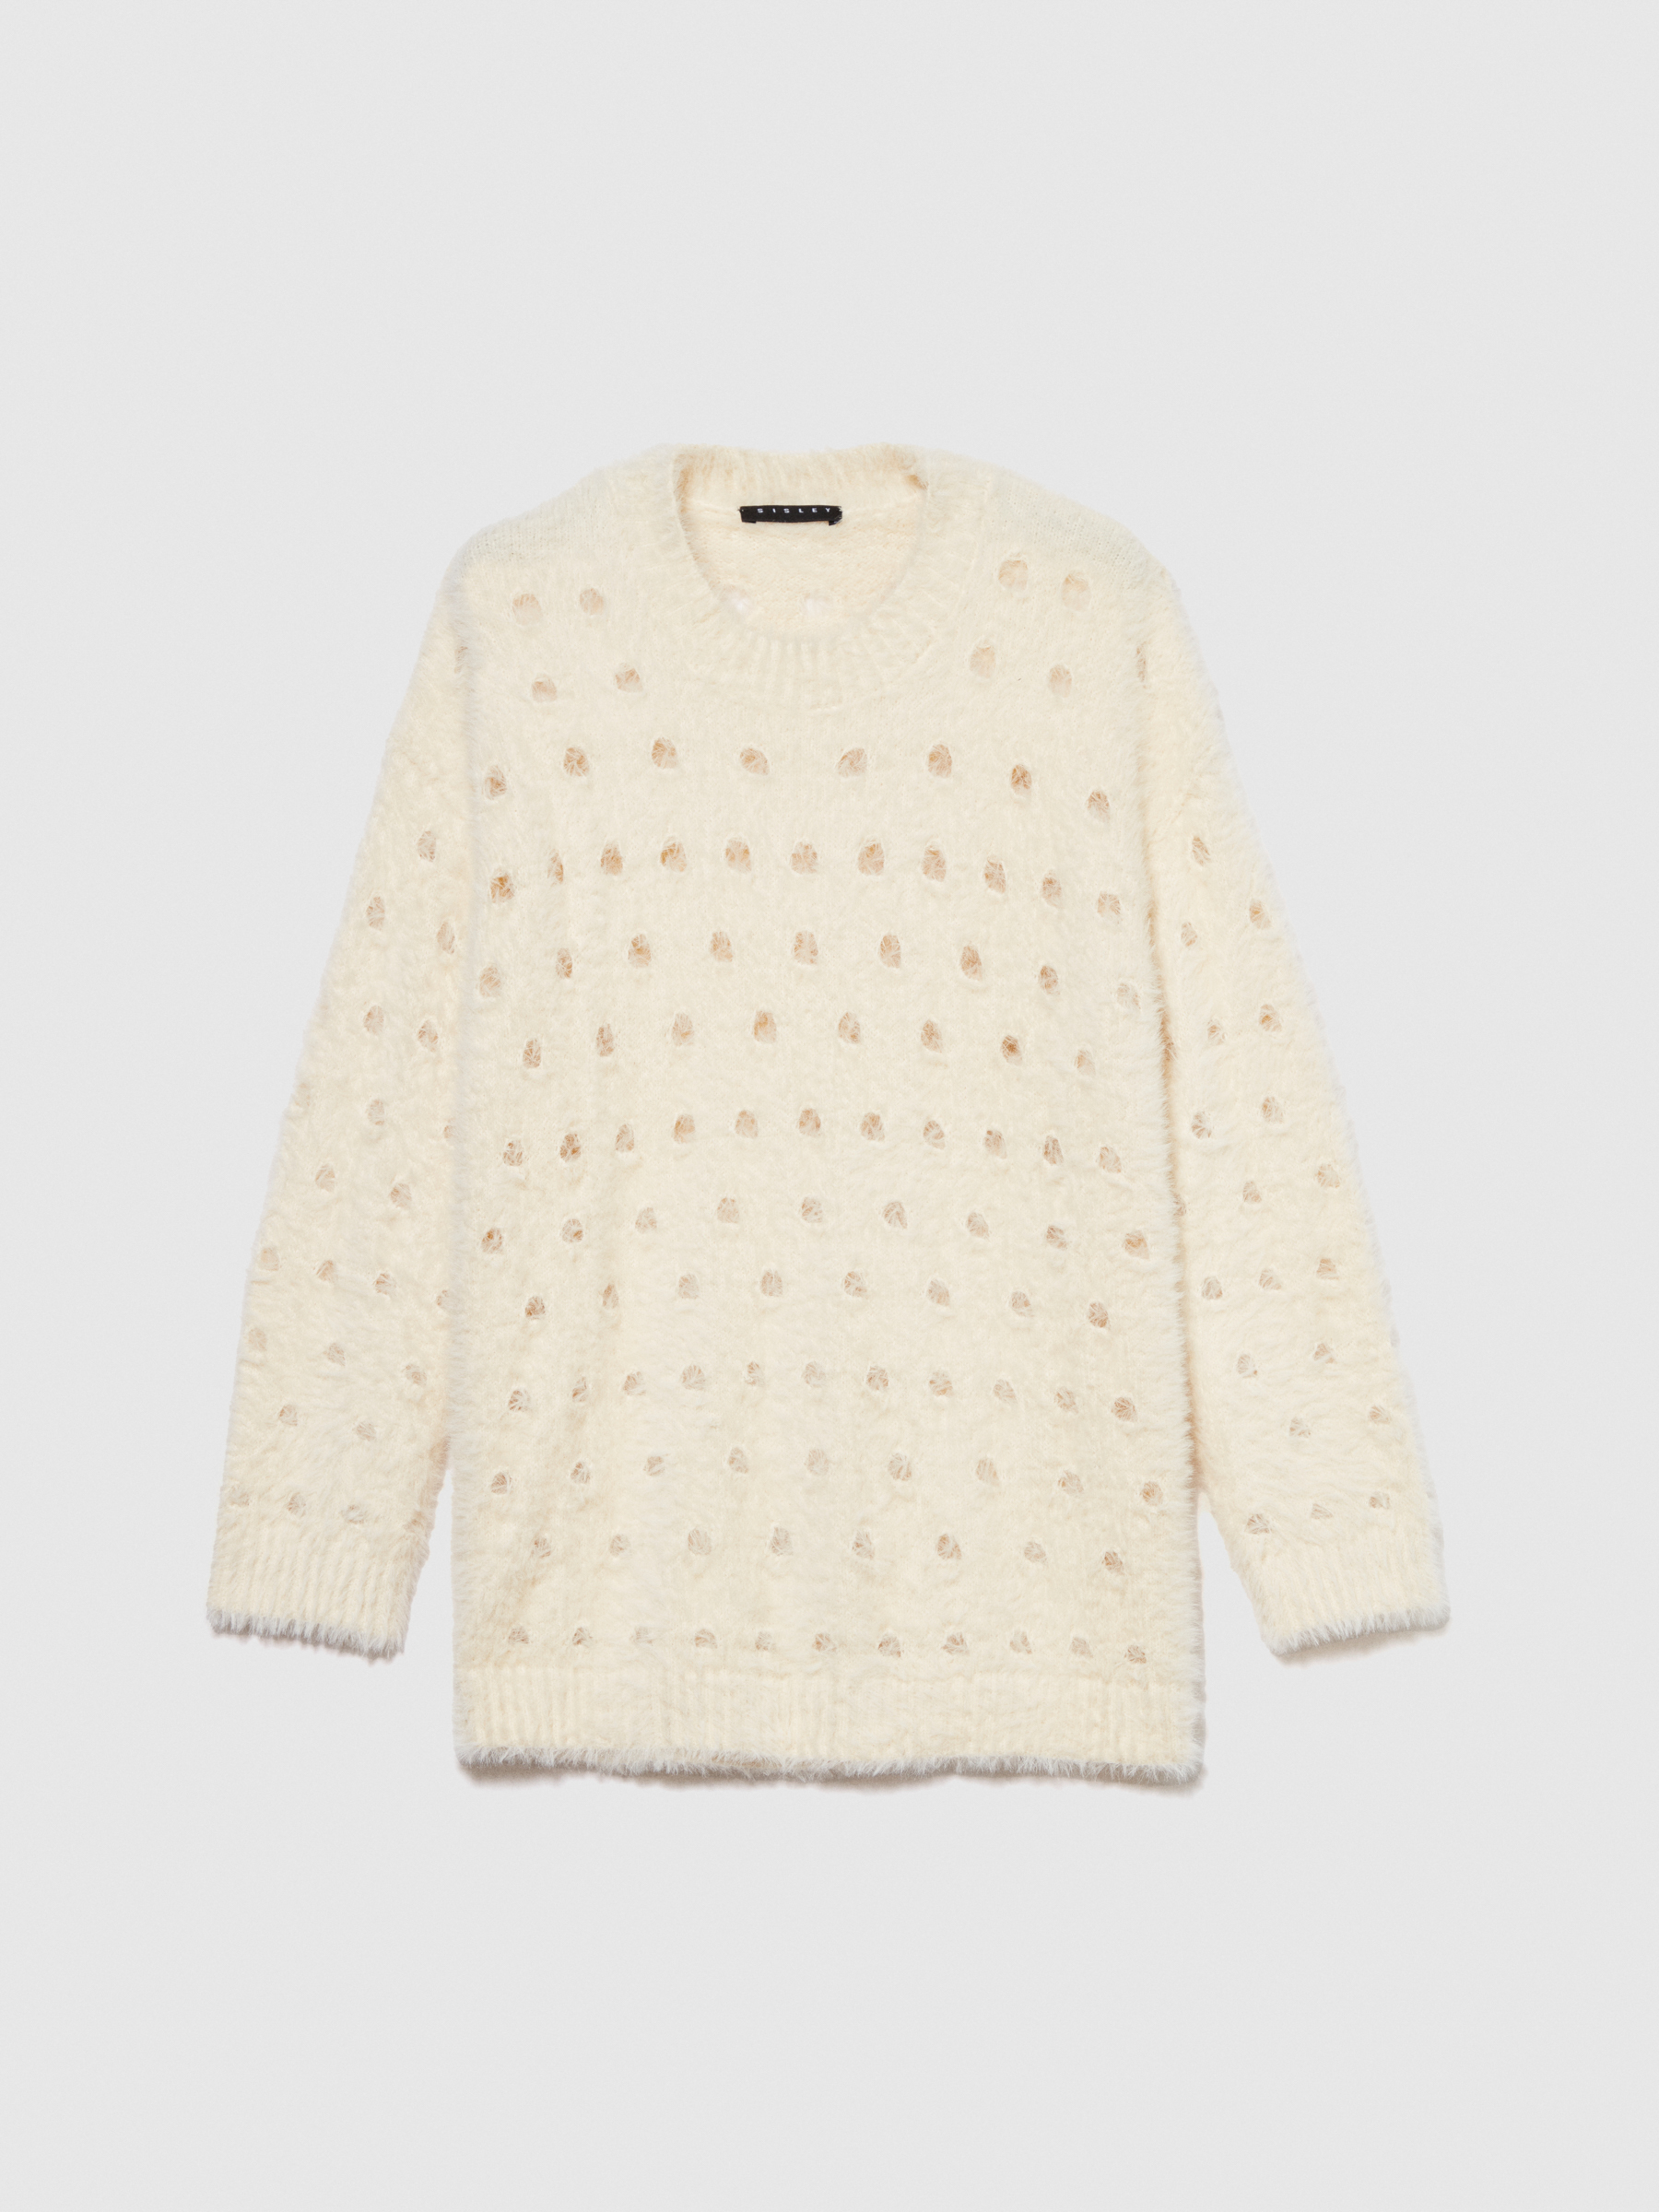 Sisley Young - Fluffy Open-knit Sweater, Woman, Creamy White, Size: L